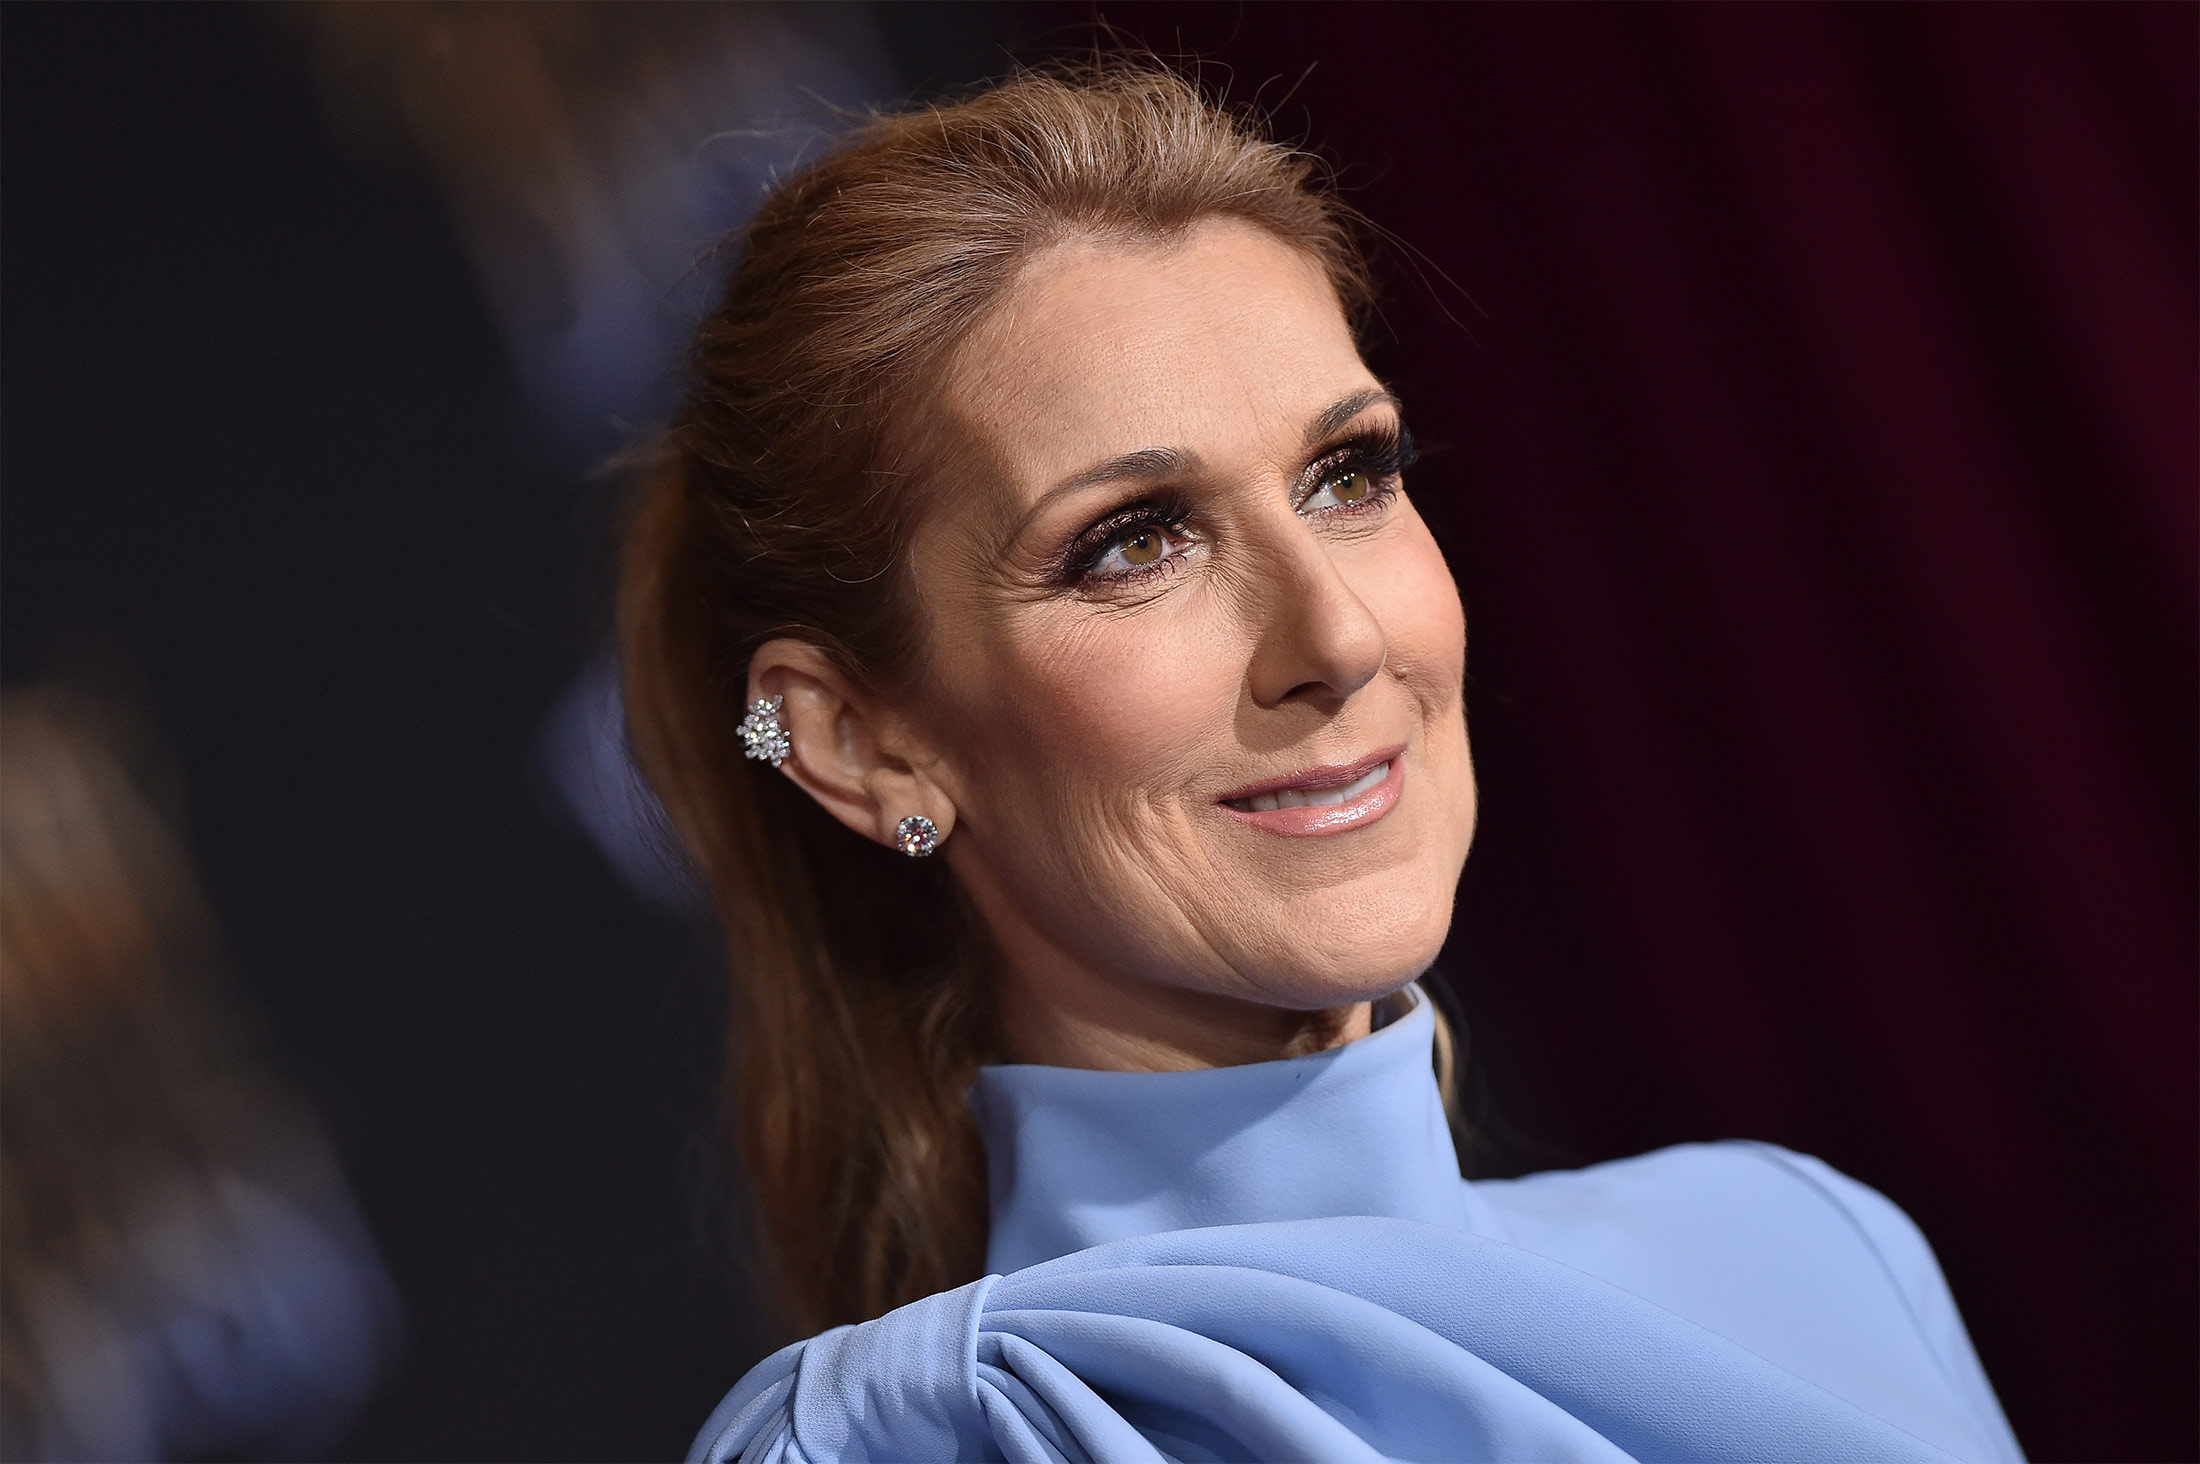 Céline Dion Has StiffPerson Syndrome. What It Is and How It's Treated